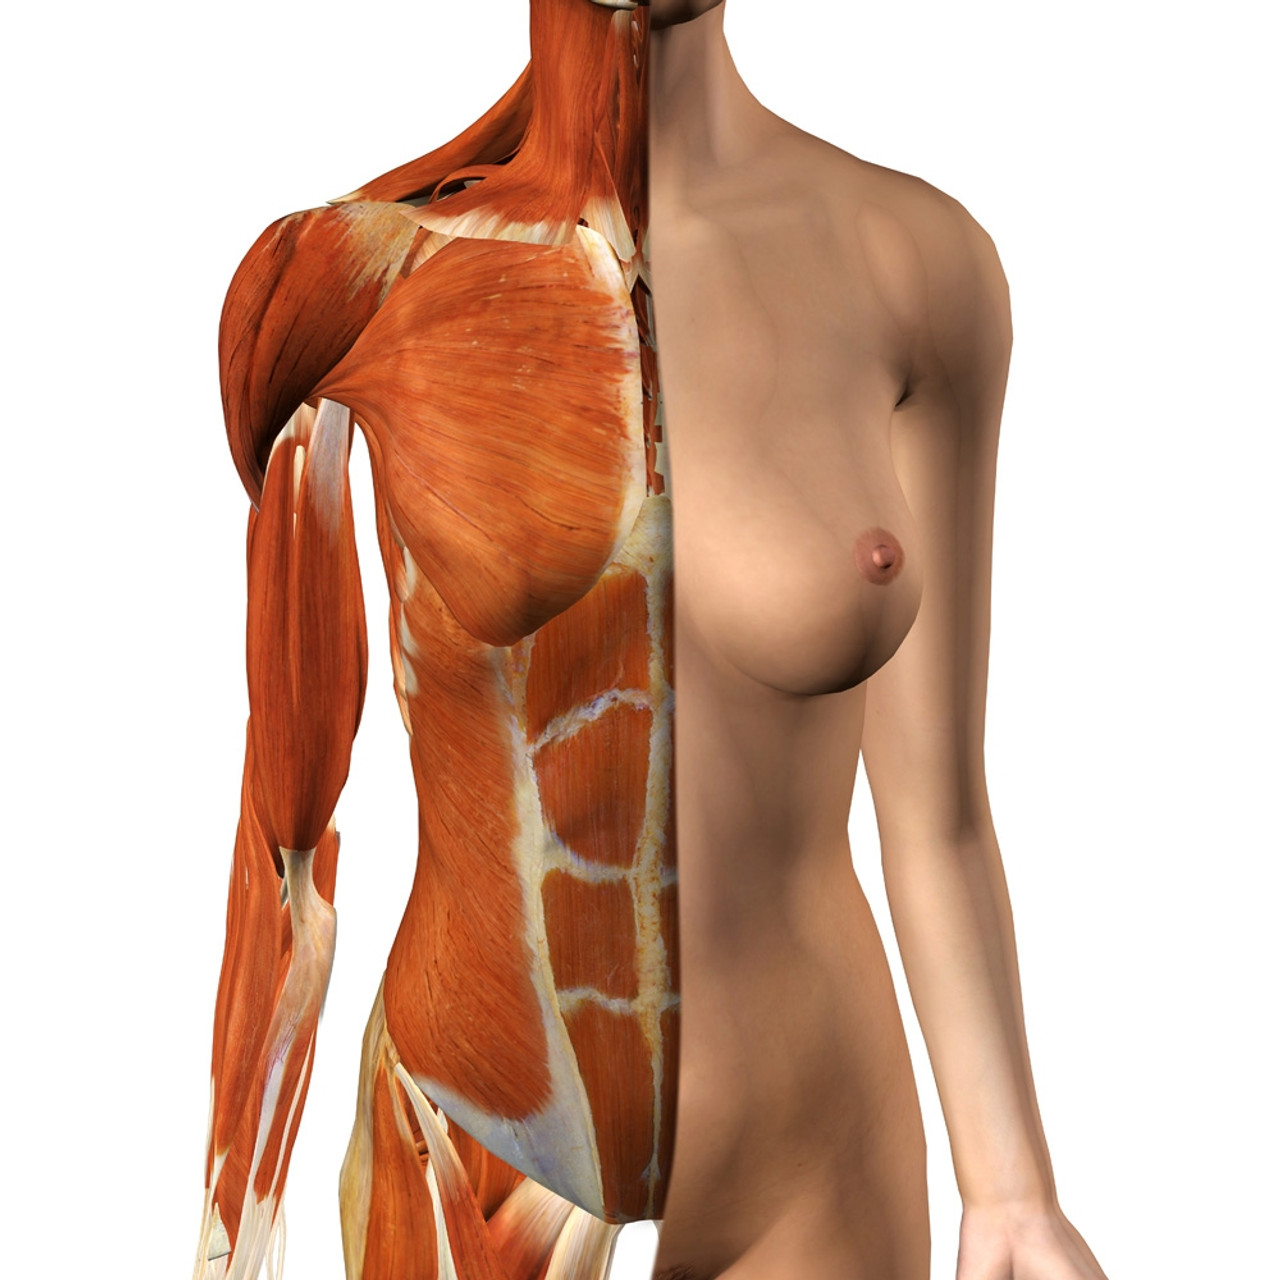 Female Chest And Abdomen Muscles, Split #1 by Hank Grebe